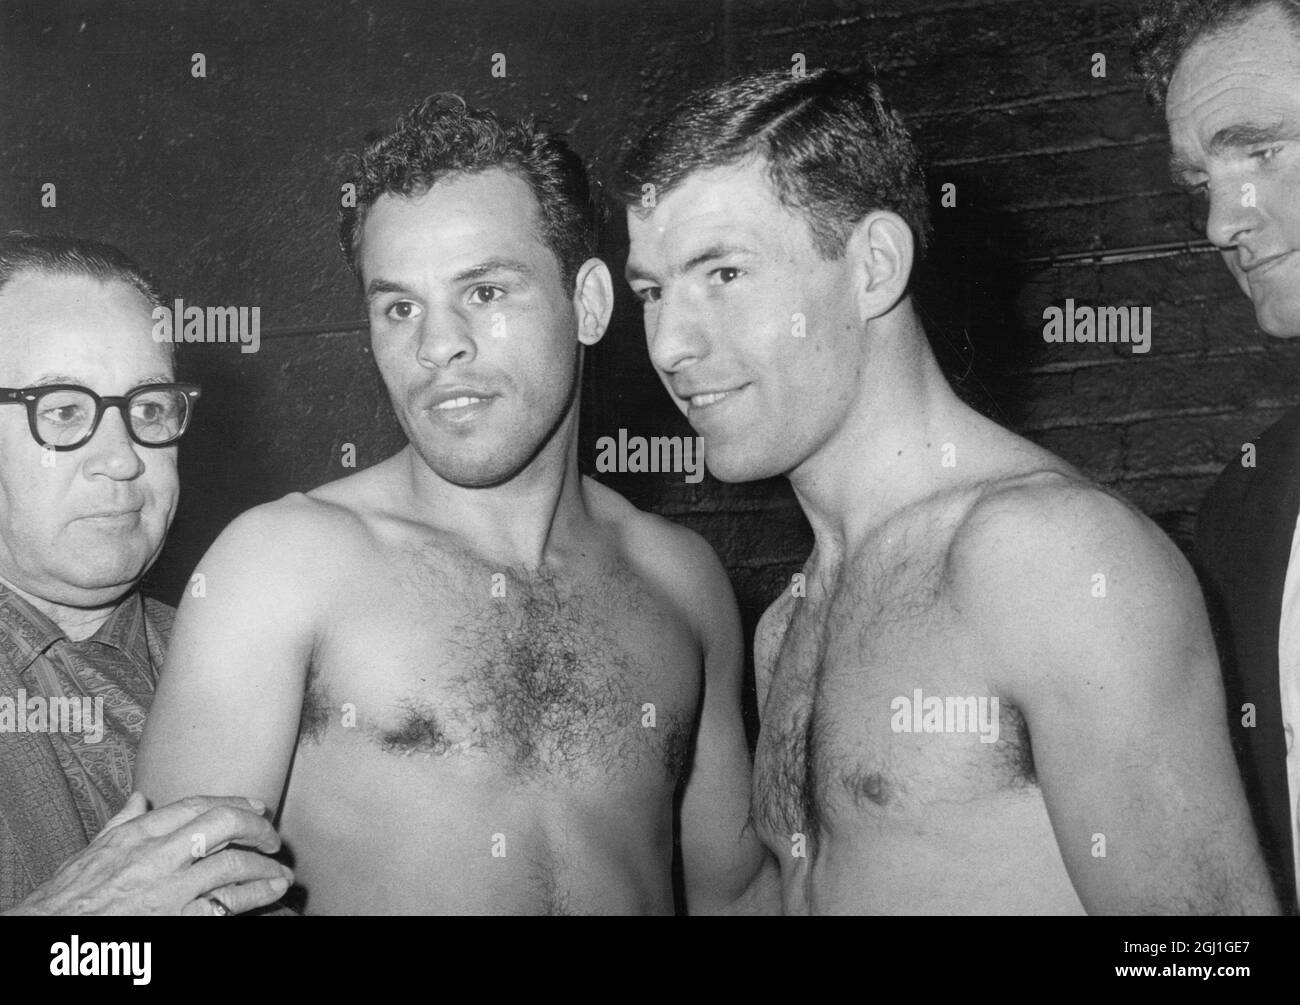 Brian Curvis boxer from Swansea, Wales and Ralph Dupas boxer from New Orleans USA (left) seen at the weigh in before the World Welterweight Championships Wembley London September 1962 Stock Photo